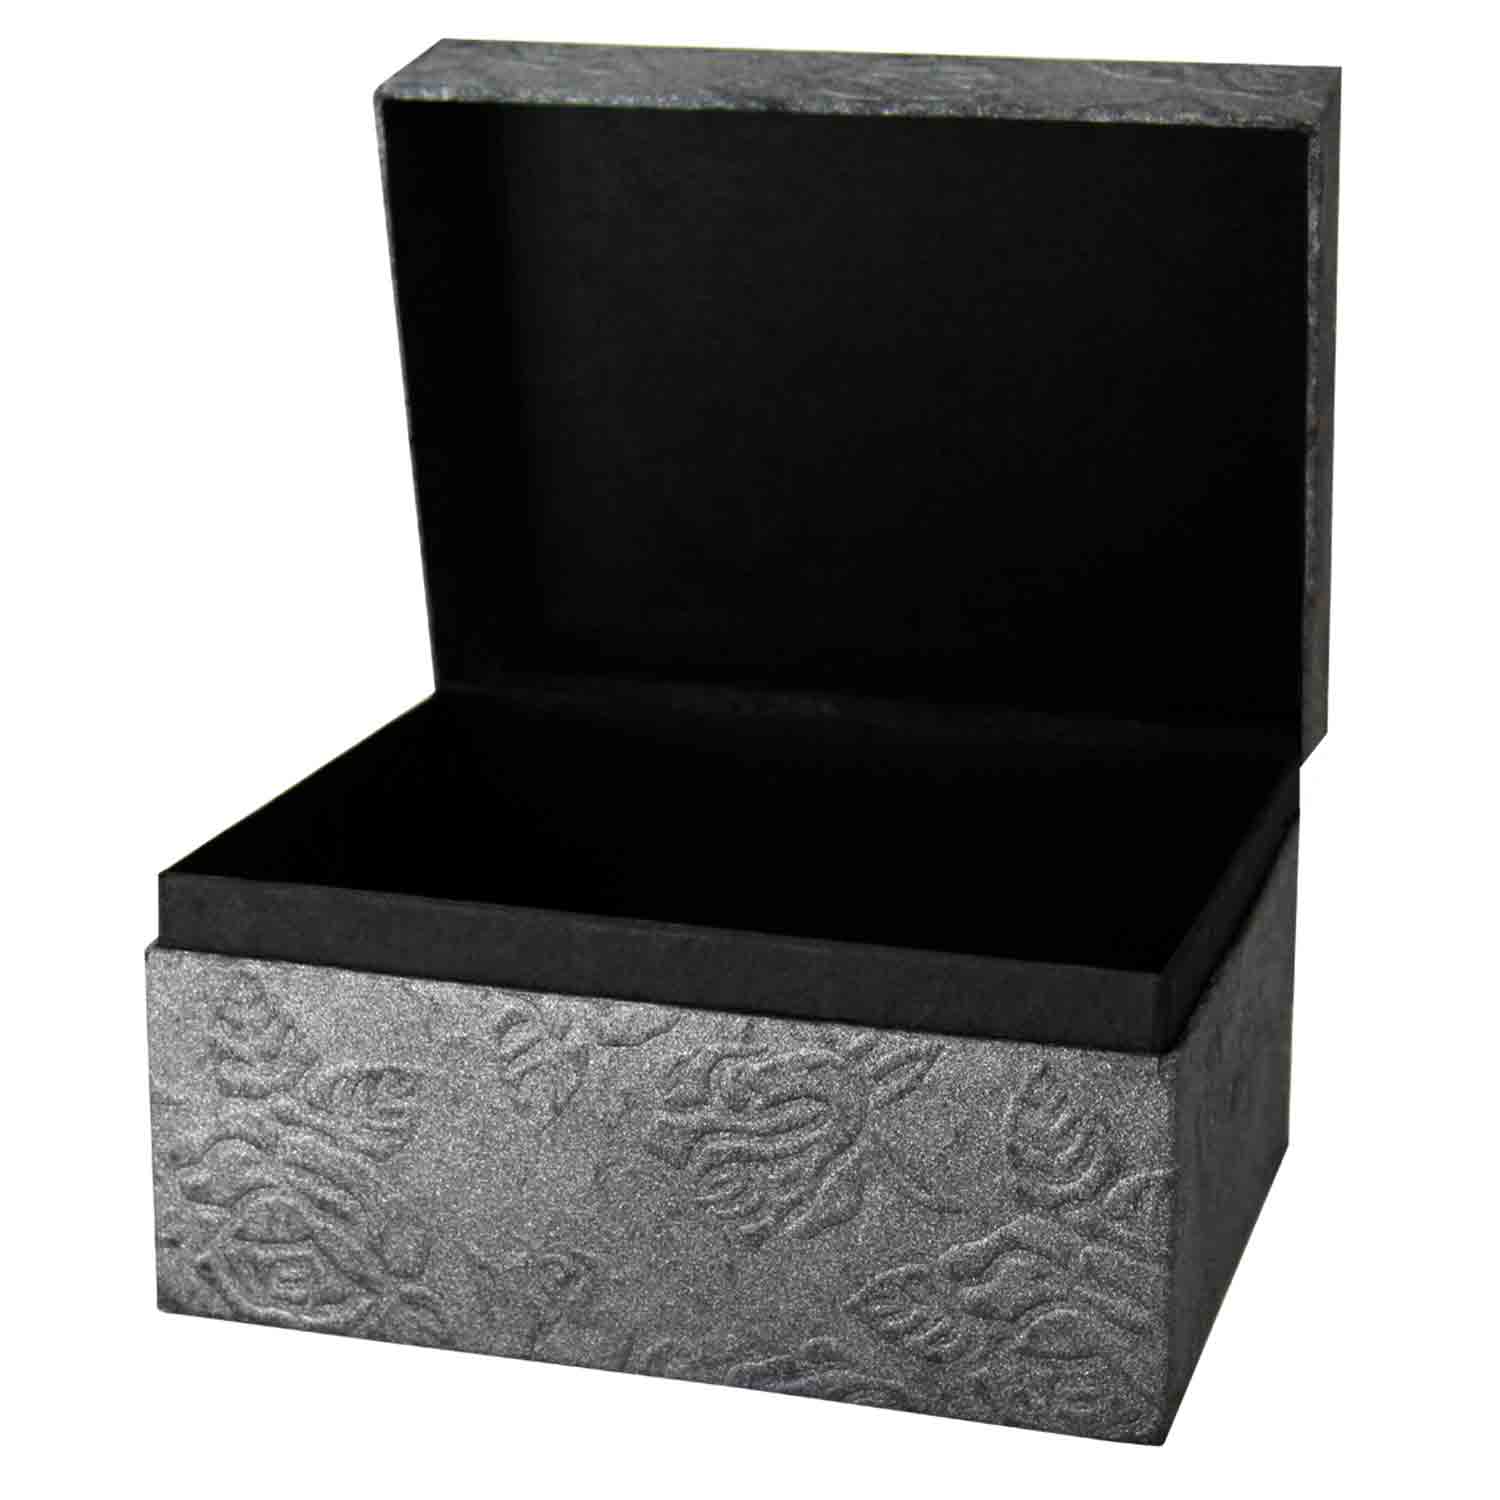 EarthUrn Chest Biodegradable Urn for Ashes in Embossed Black Large Open